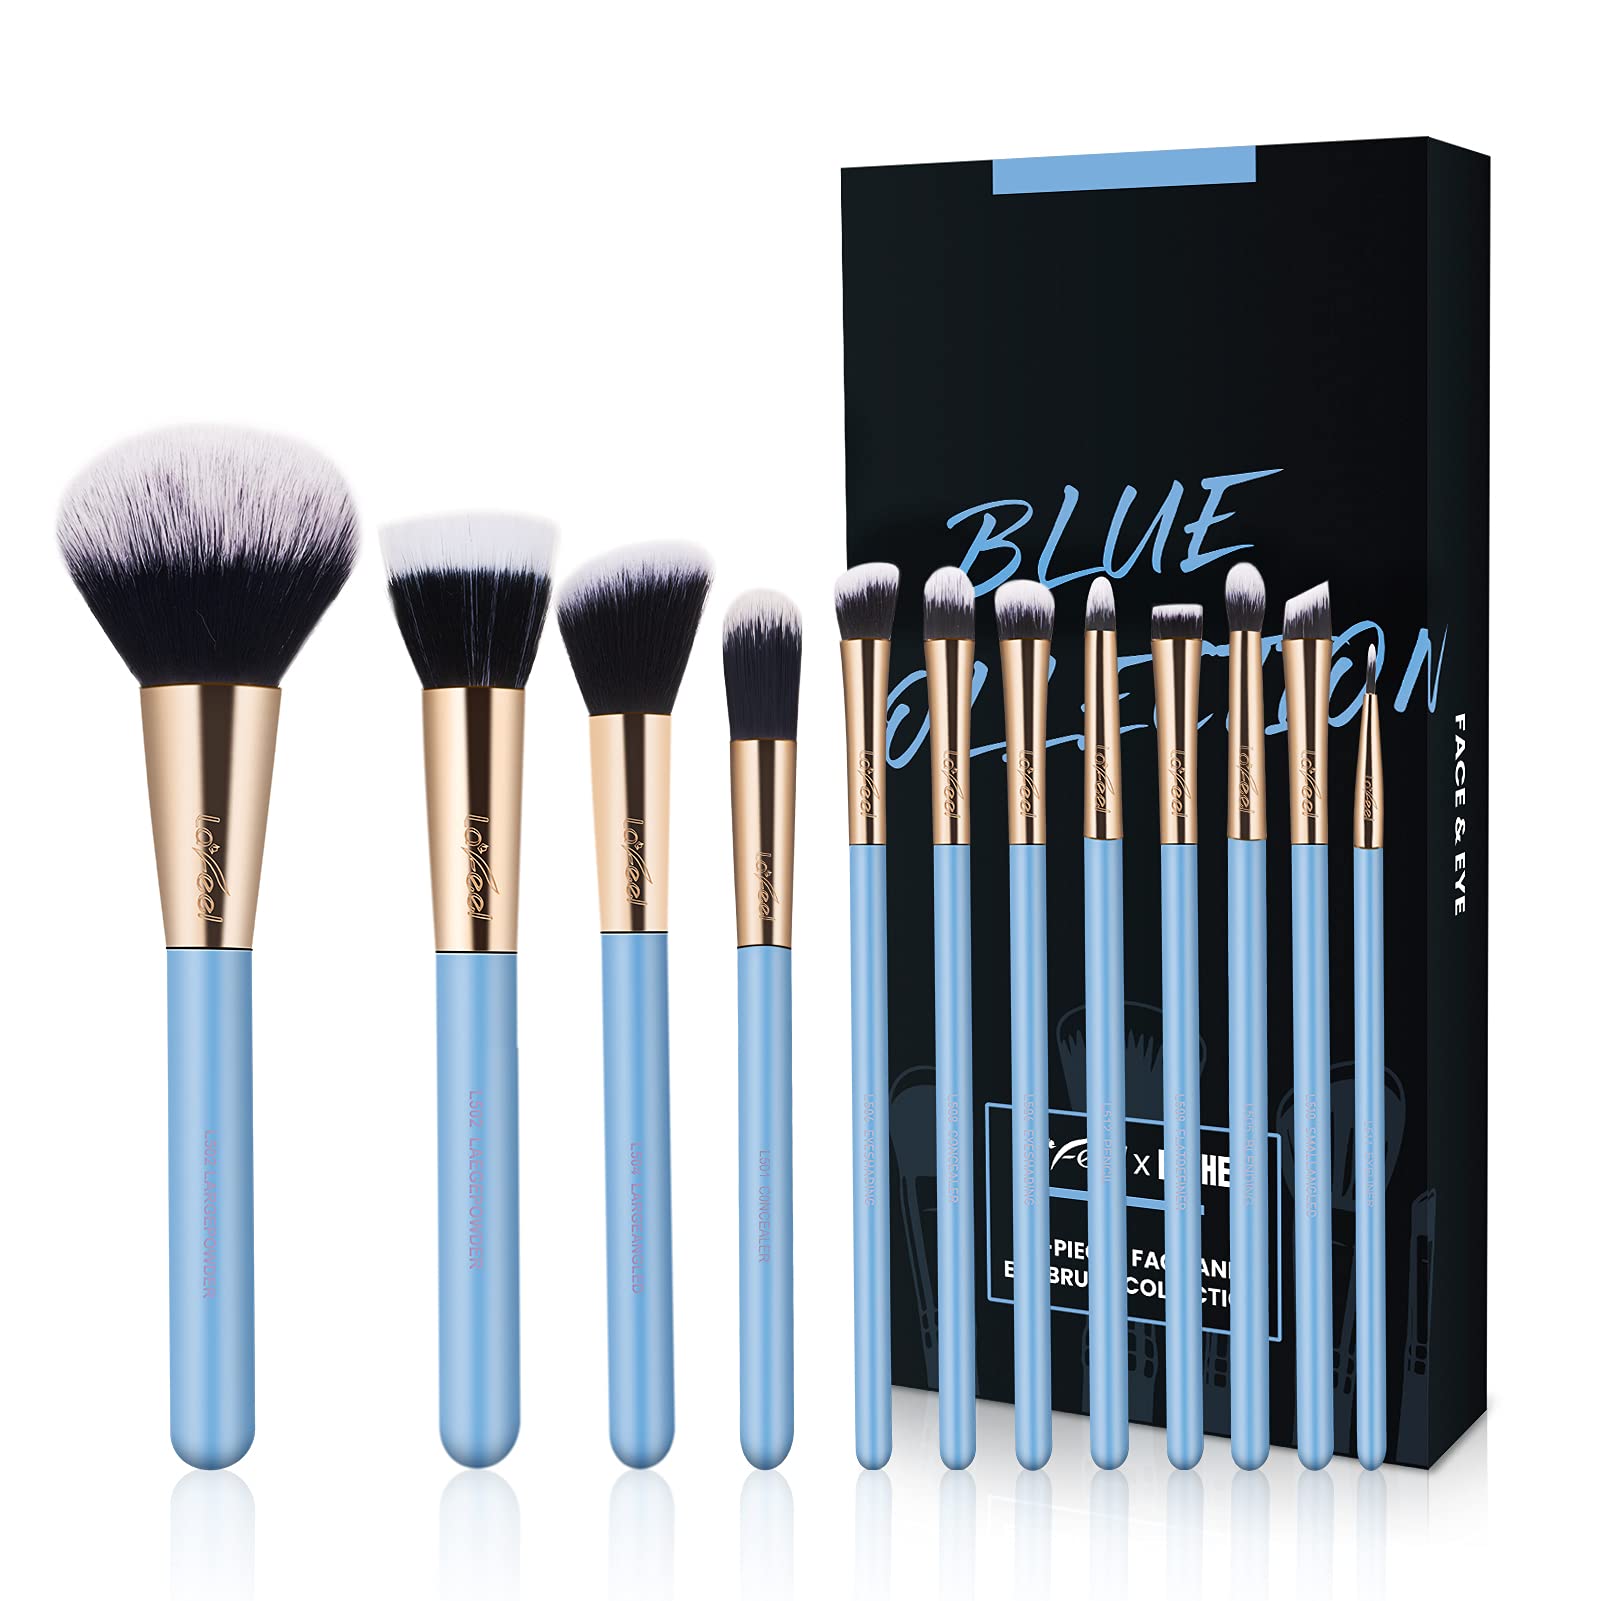 Enther & LaFeel Makeup Brush Set, Premium Cosmetic Wood Handle Brushes 12pcs for Foundation Blending Blush Concealer Eye Shadow, Cruely-Free Synthetic Fiber Bristles, Blue Collection